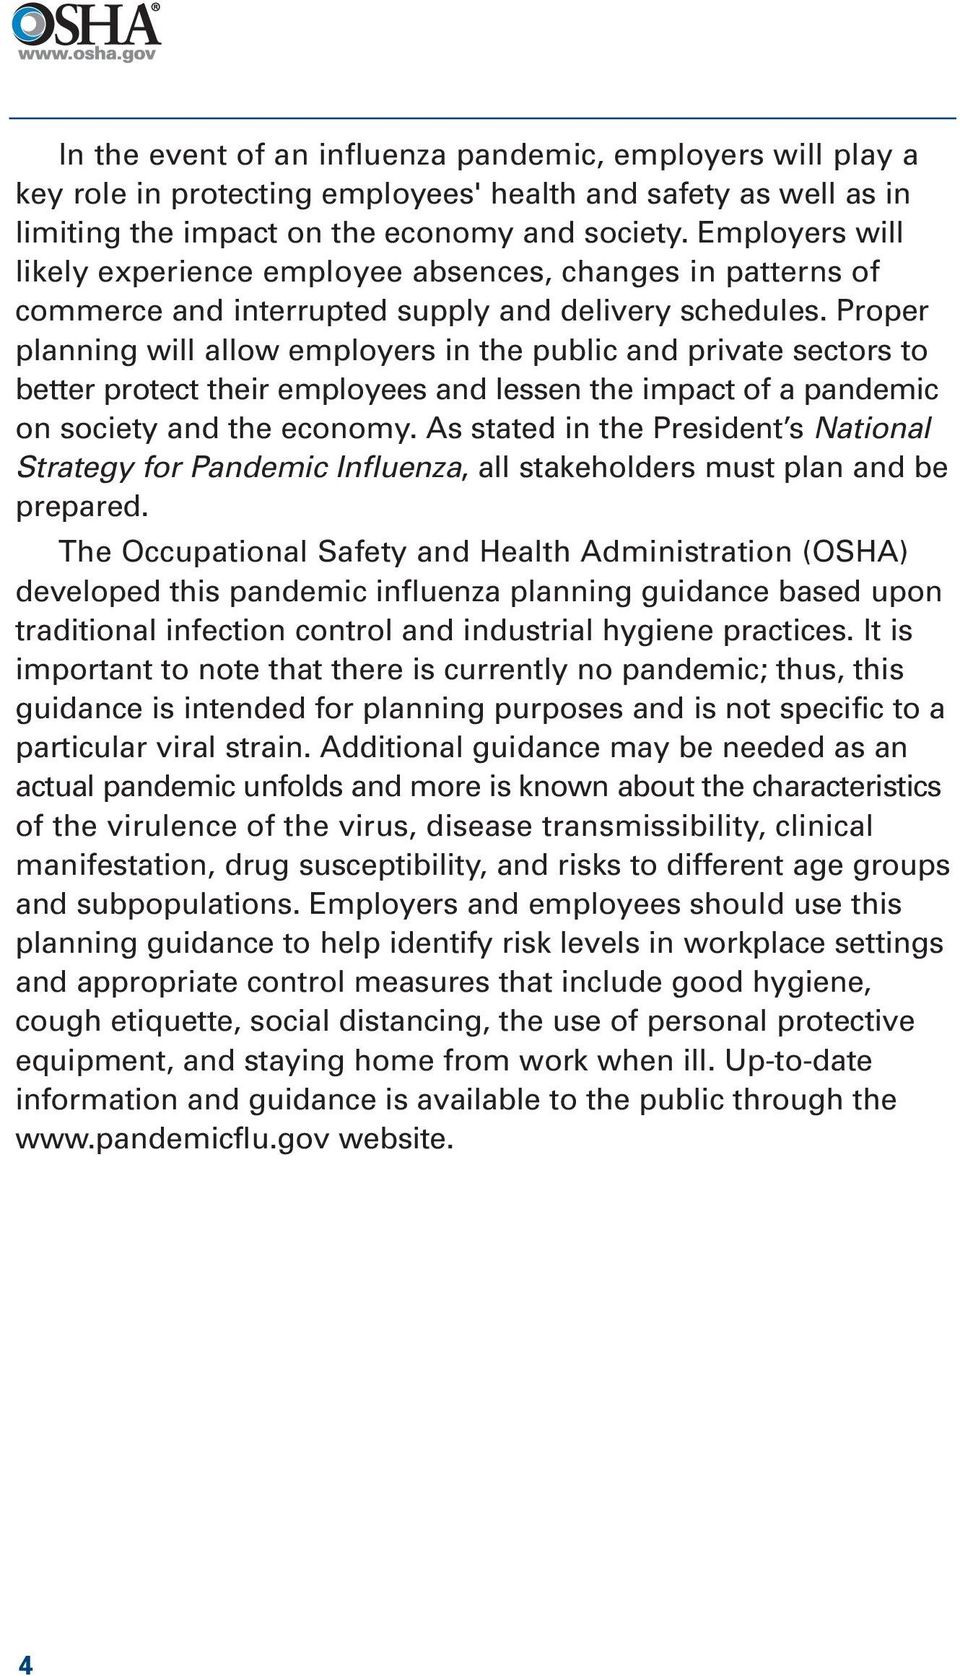 Proper planning will allow employers in the public and private sectors to better protect their employees and lessen the impact of a pandemic on society and the economy.